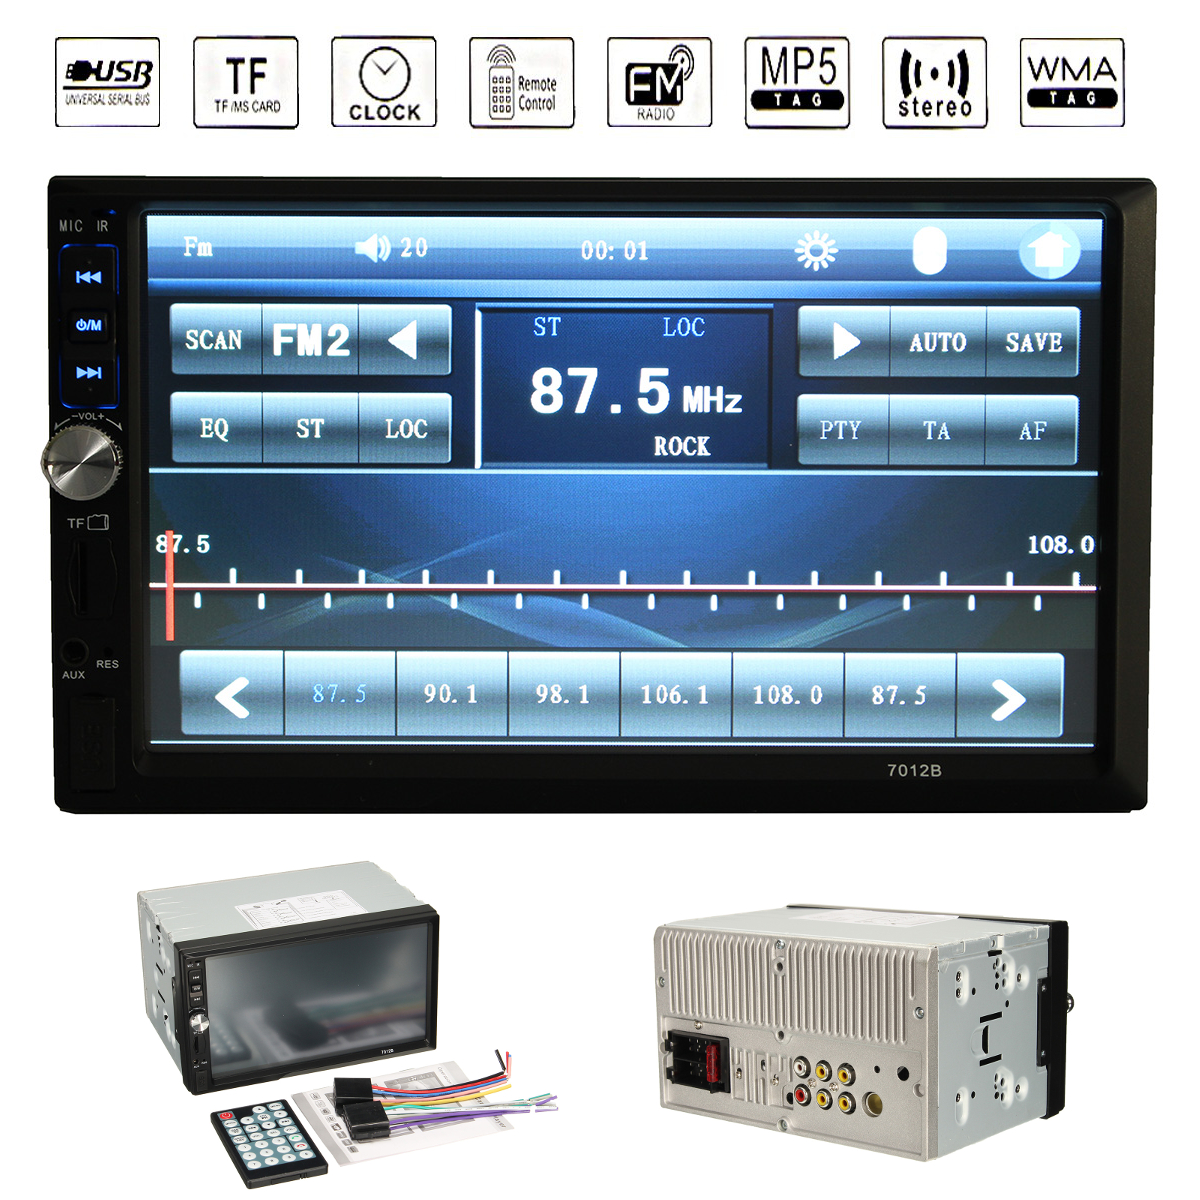 7012B-7inch-2DIN-Car-bluetooth-Touchscreen-MP3-MP4-MP5-Player-Video-Stereo-FM-Aux-Input-1029587